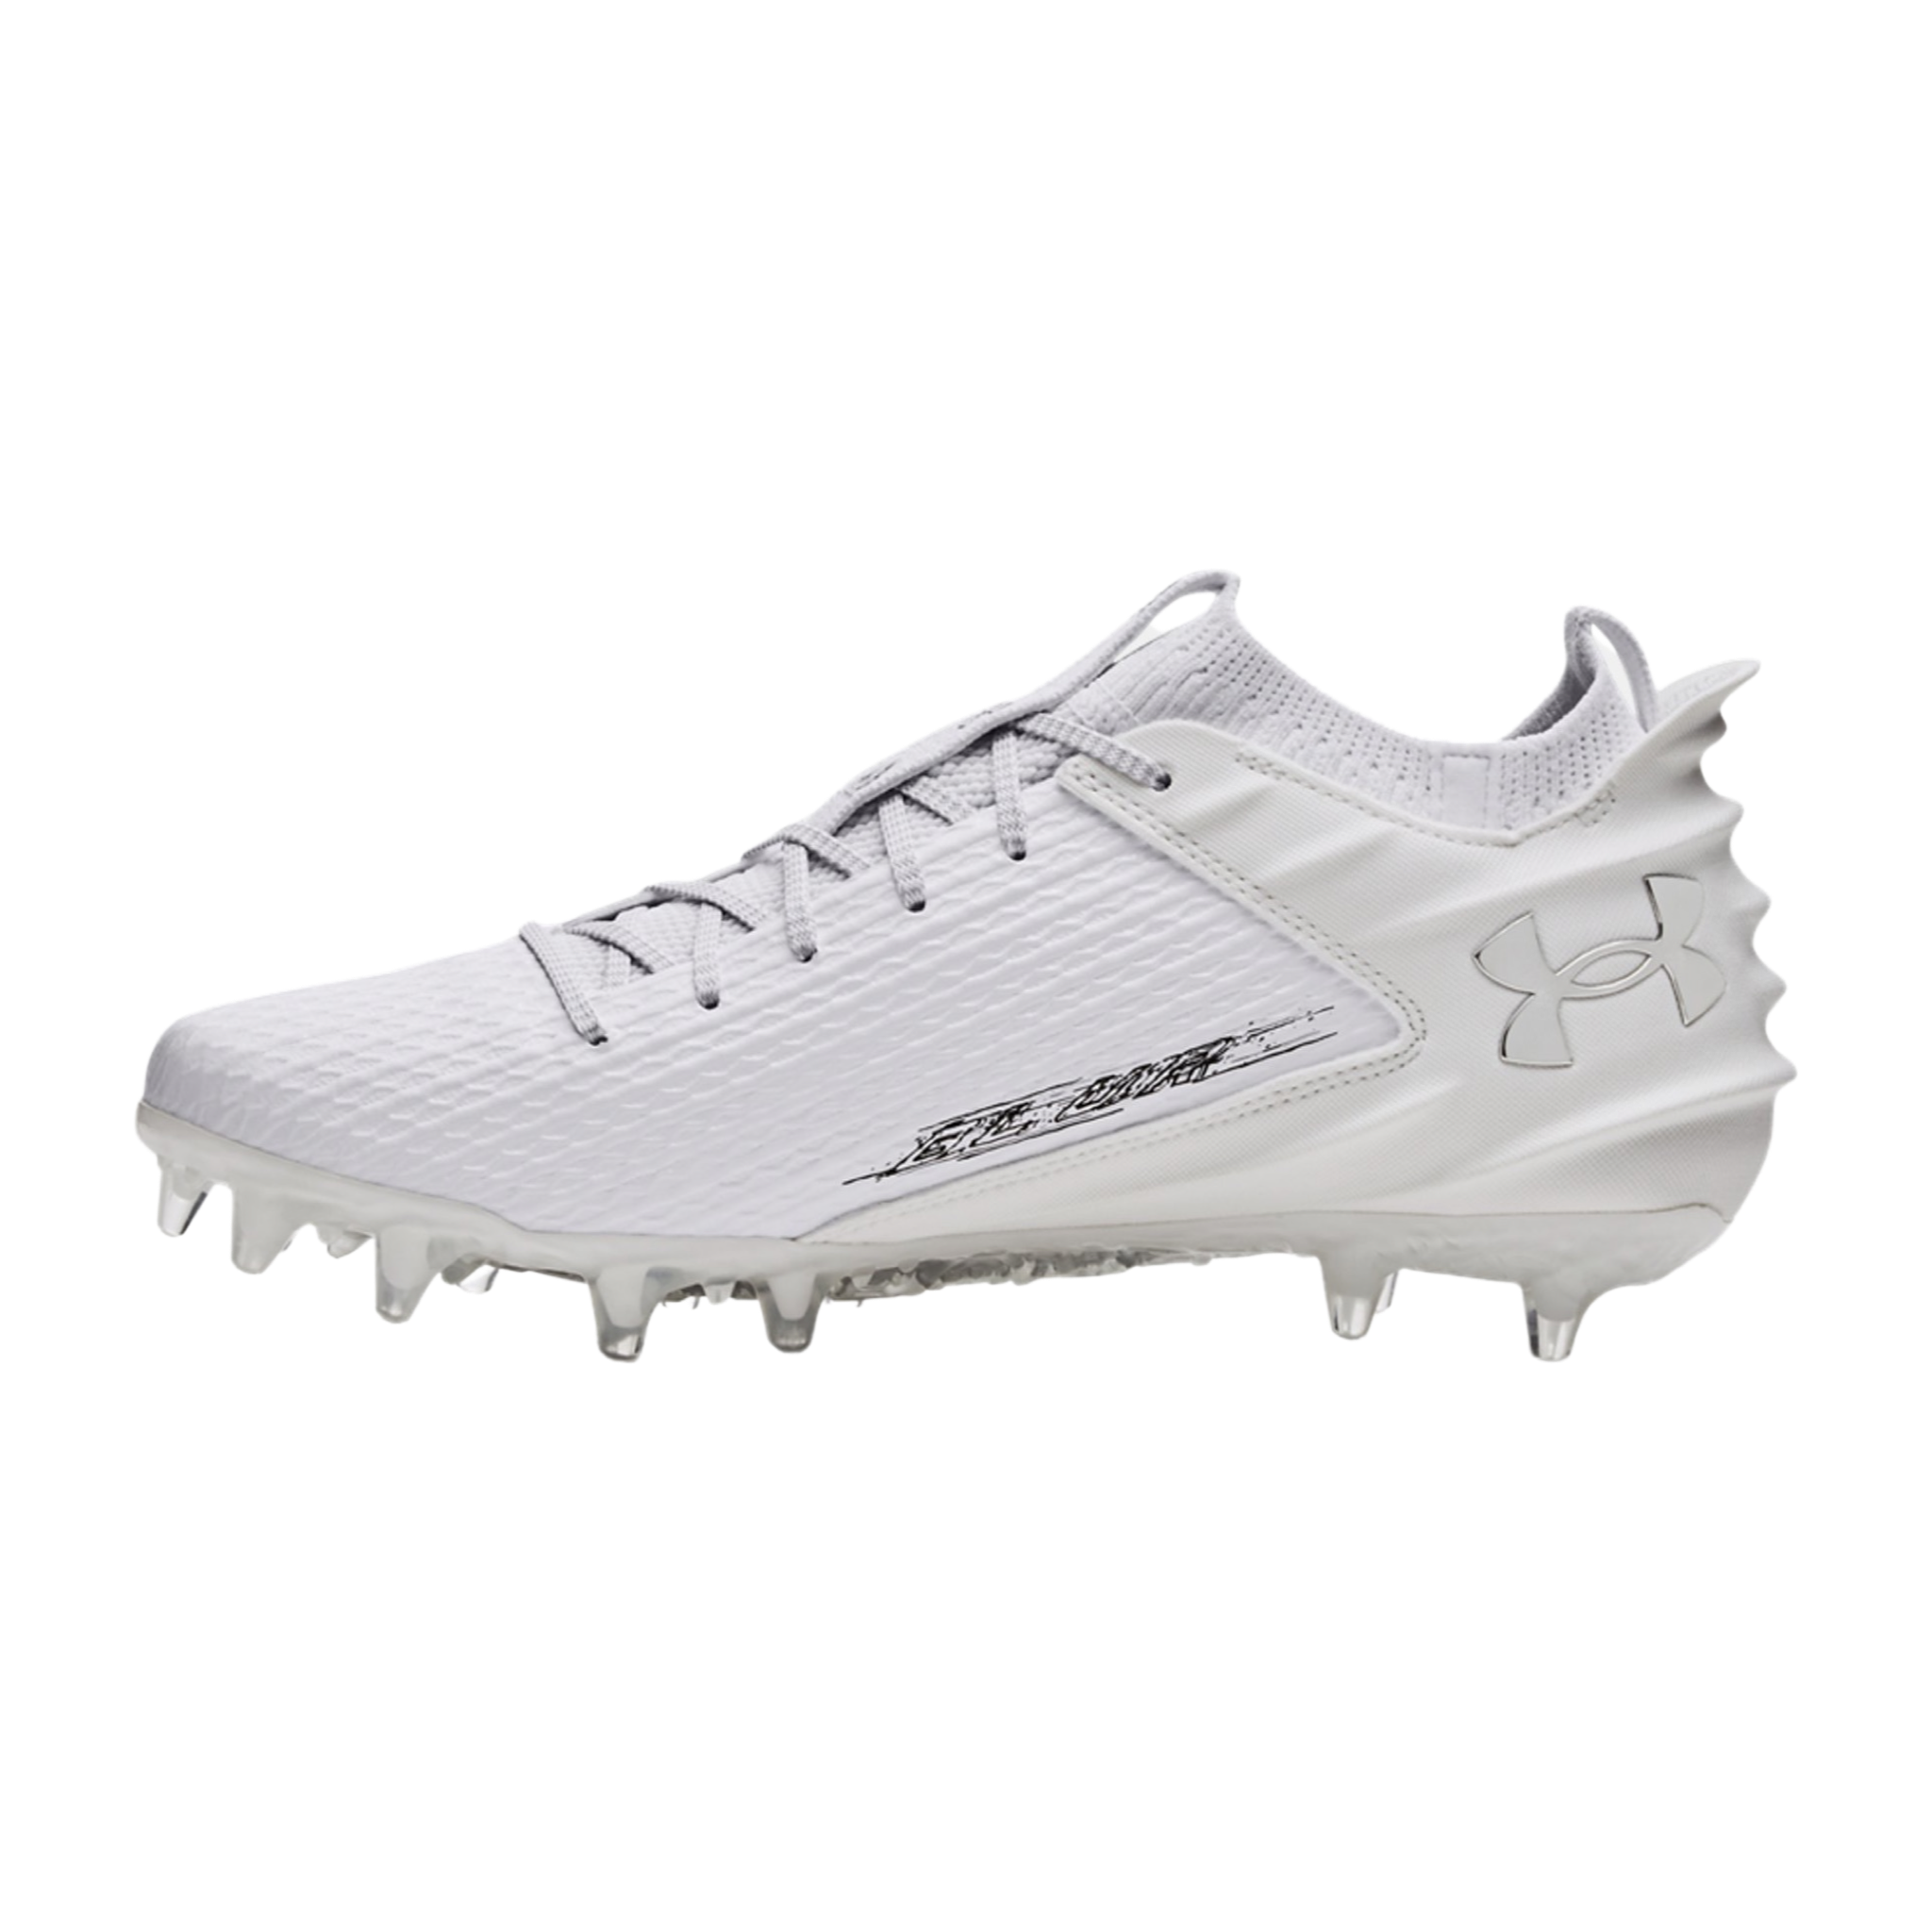 Under Armor Men's Blur Smoke 2.0 MC Football Cleats - White- football cleats for receiver, DB, running back